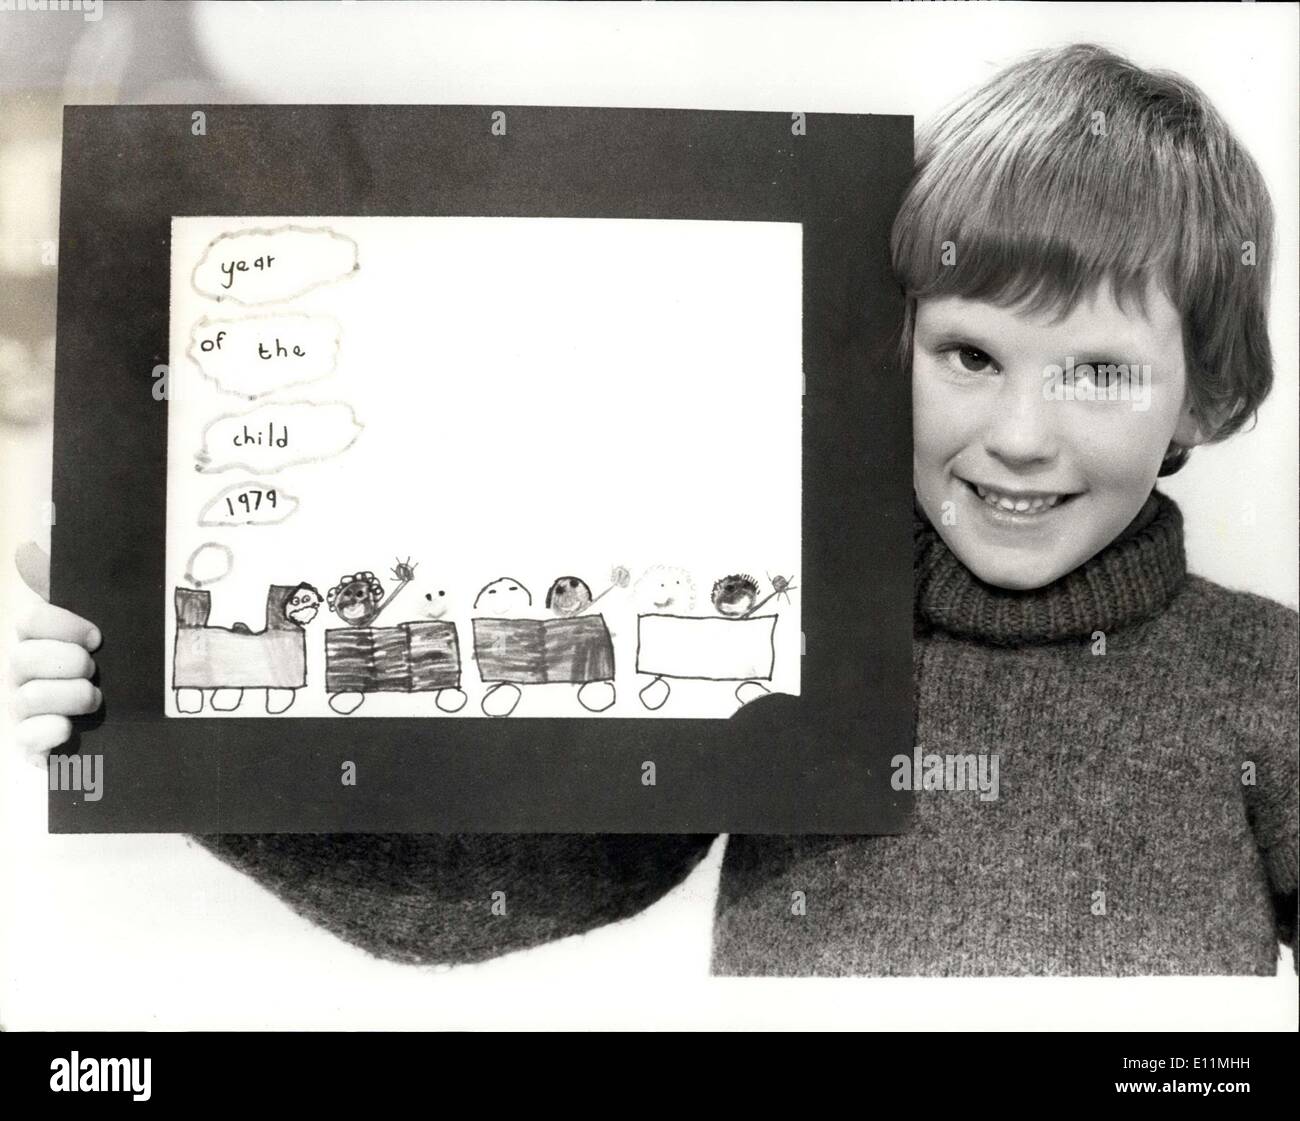 Feb. 15, 1979 - Boy of the year; For 5 year old Adrian Cresswell, the International year of the child, 1979, will always be a special year for his drawing will appear on thousands of letters with the official Post Office first day cover commemorative stamps. Adrian, from Stourbridge, in the West Midlands, was named as winner of a contest organized by the Blue Peter Children's television program to design a cover. Photo Shows Adrian Cresswell with his winning painting. Stock Photo